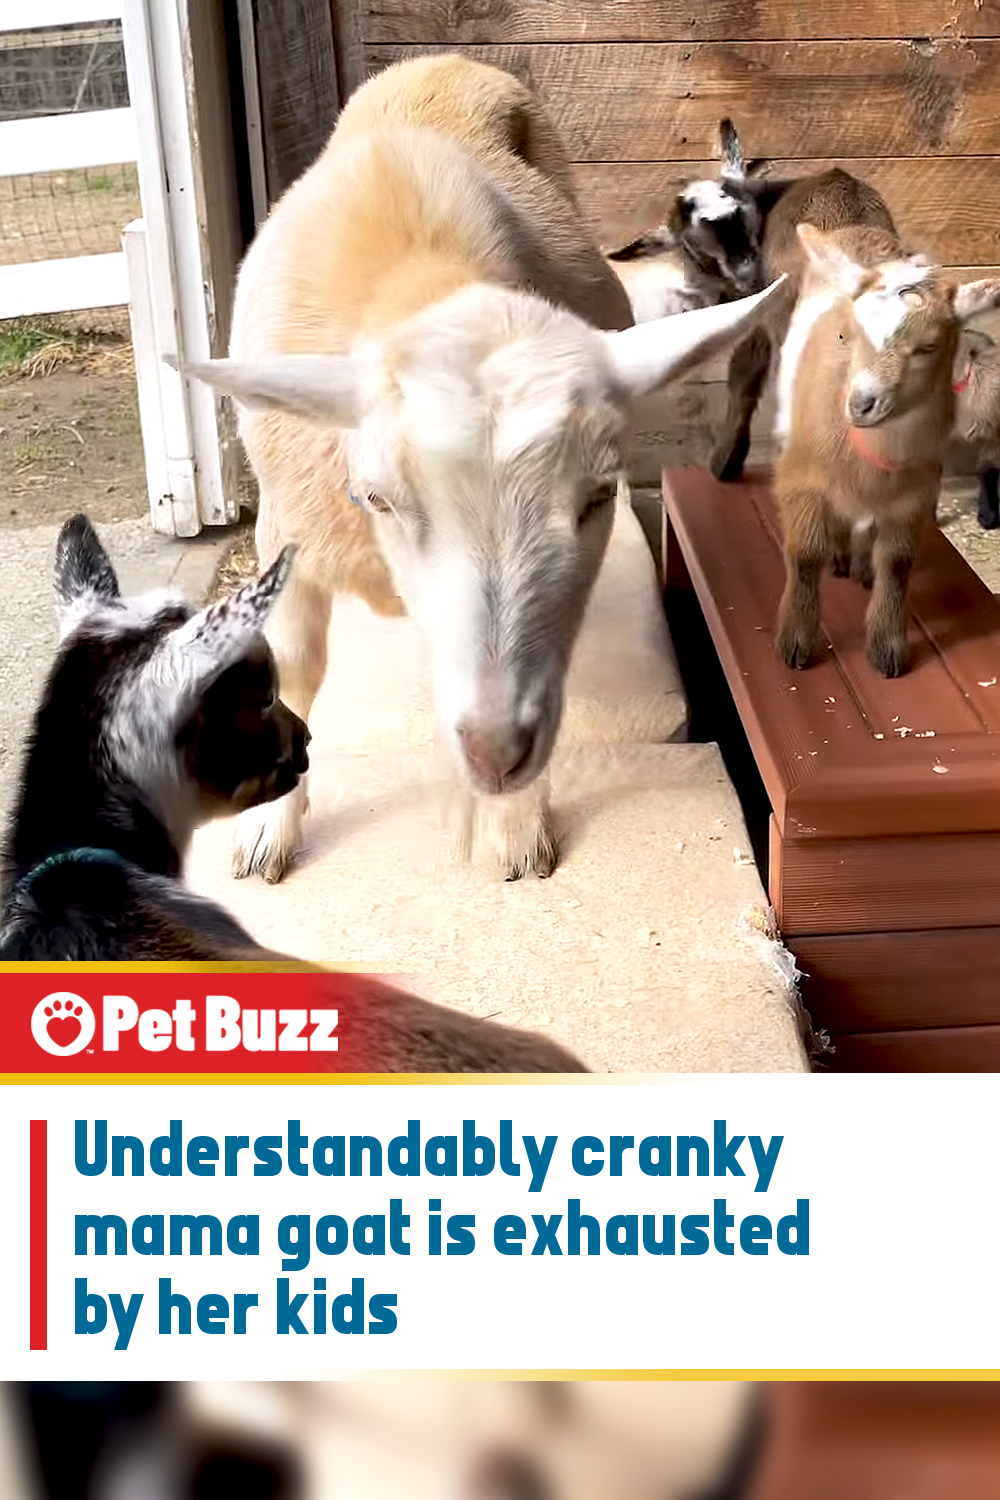 Understandably cranky mama goat is exhausted by her kids